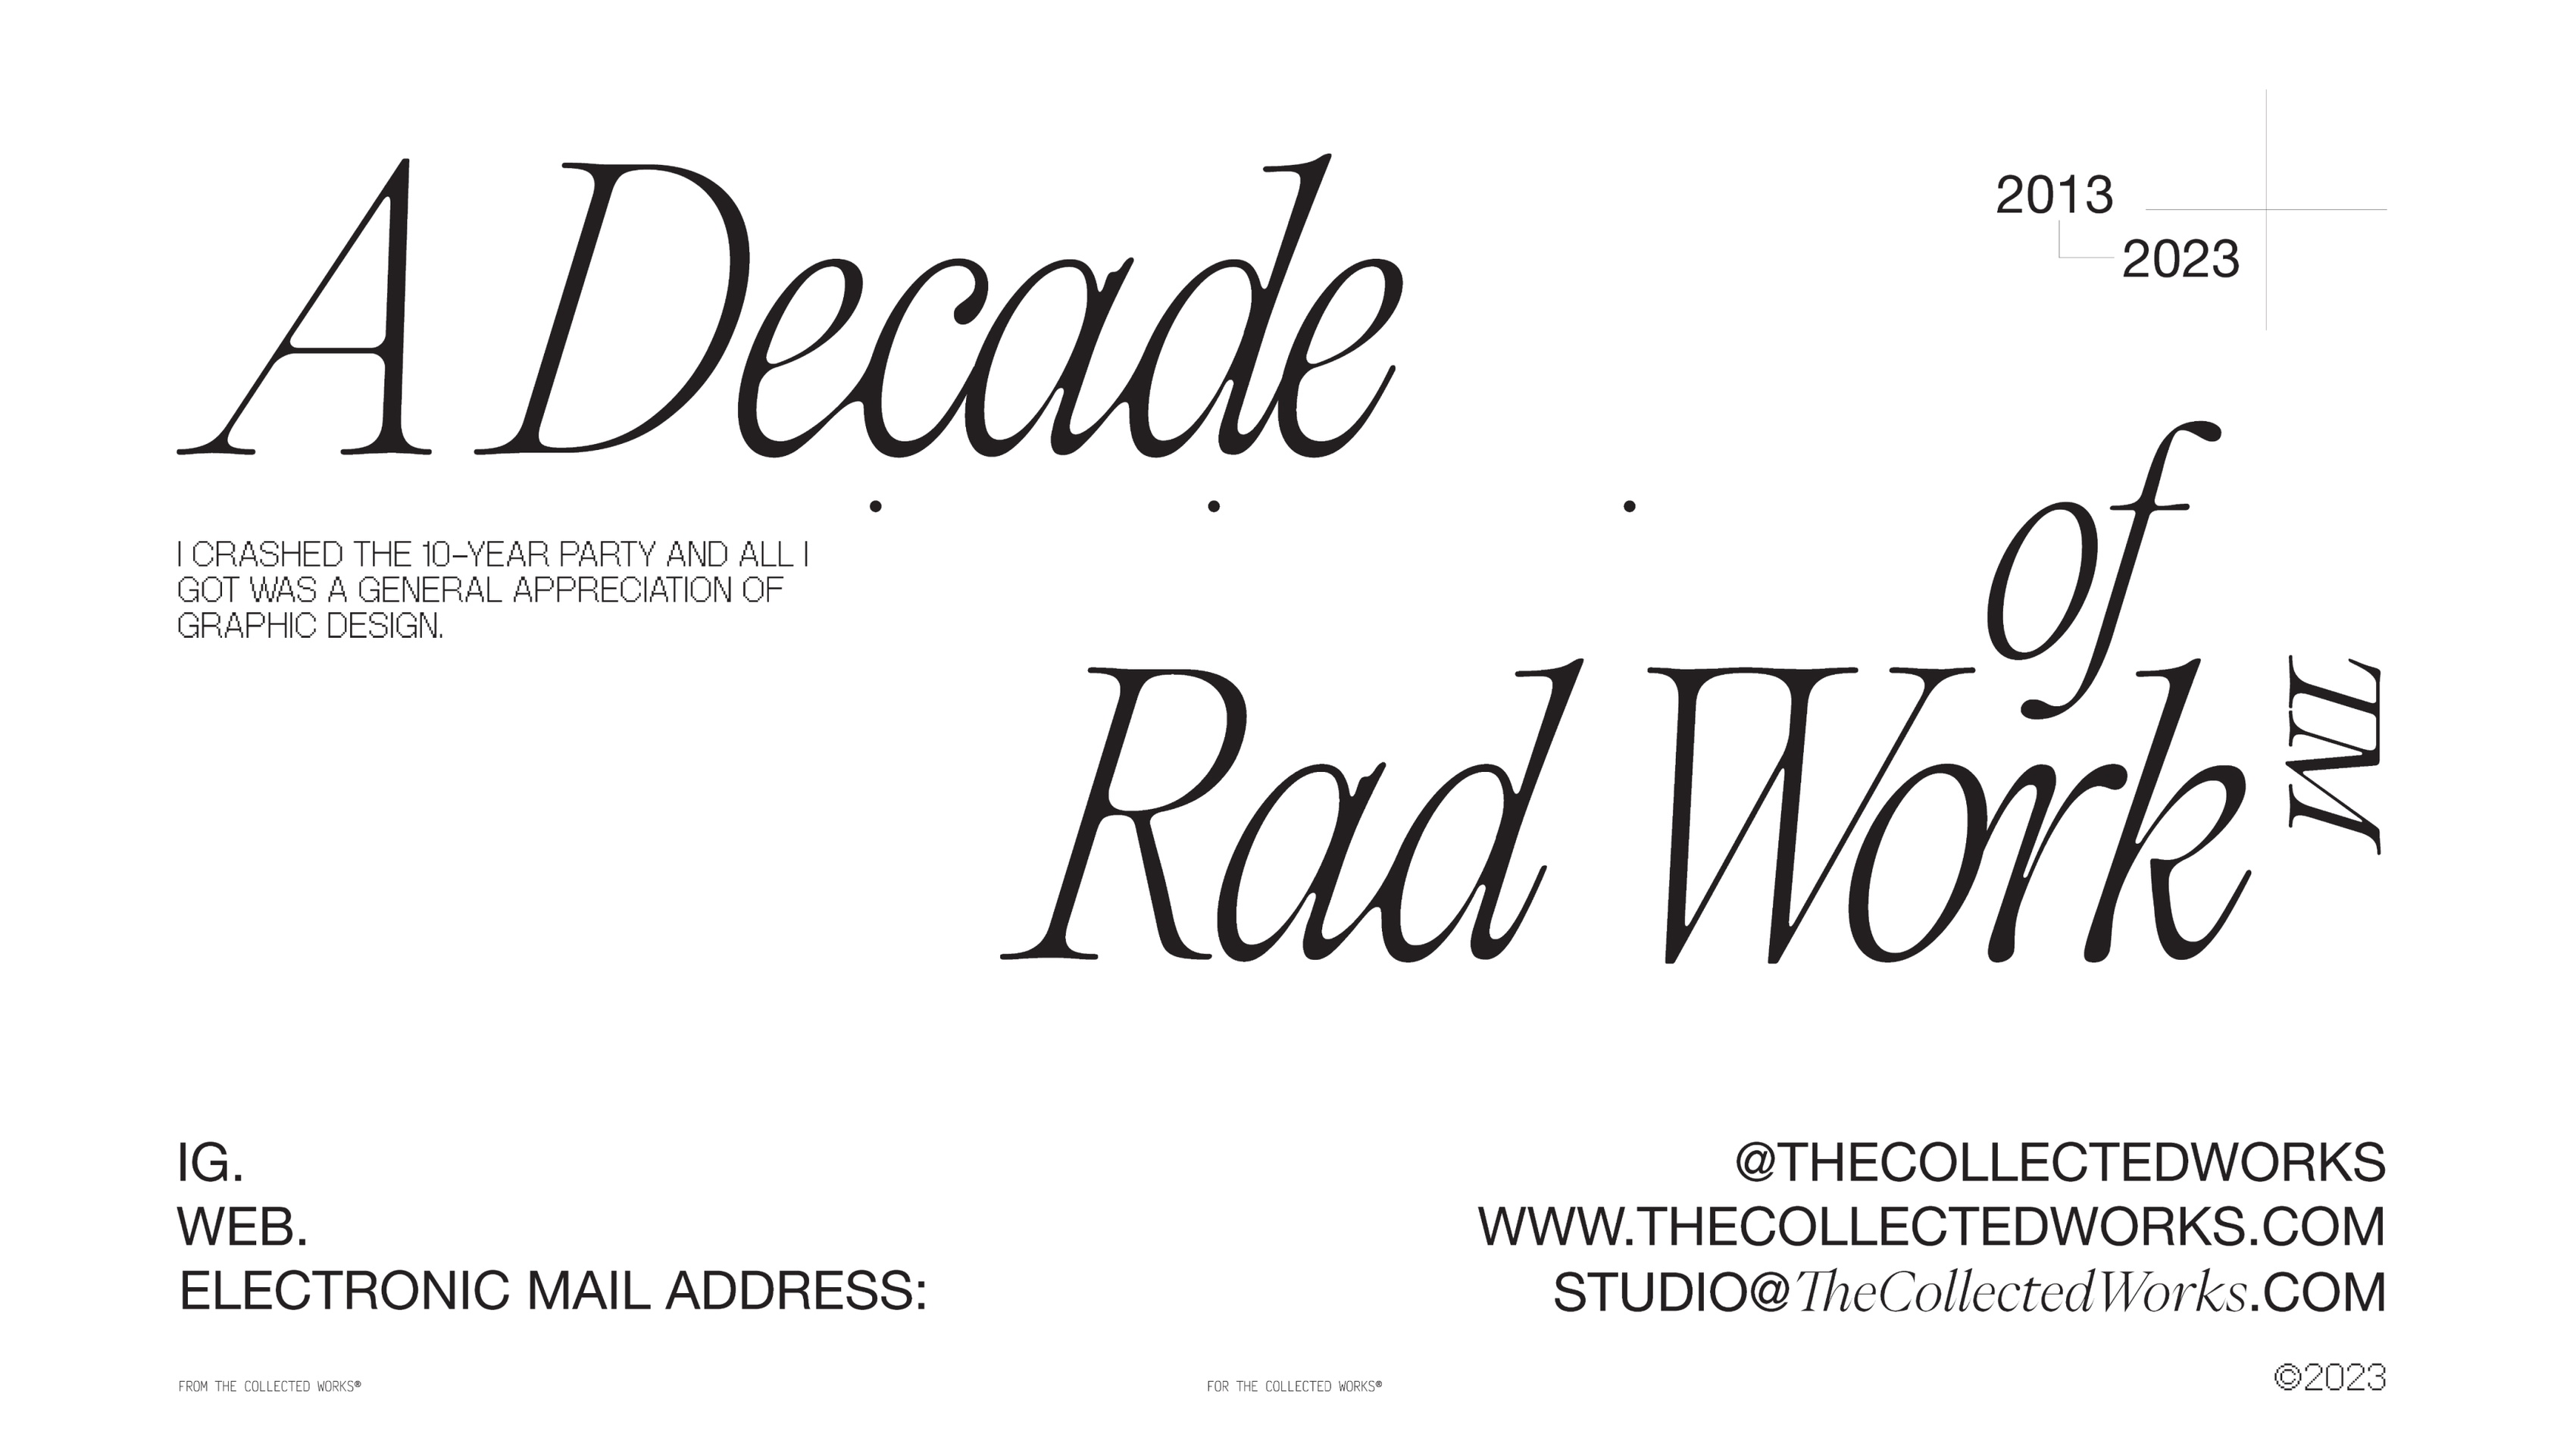 "A Decade Of Rad Work" Graphic